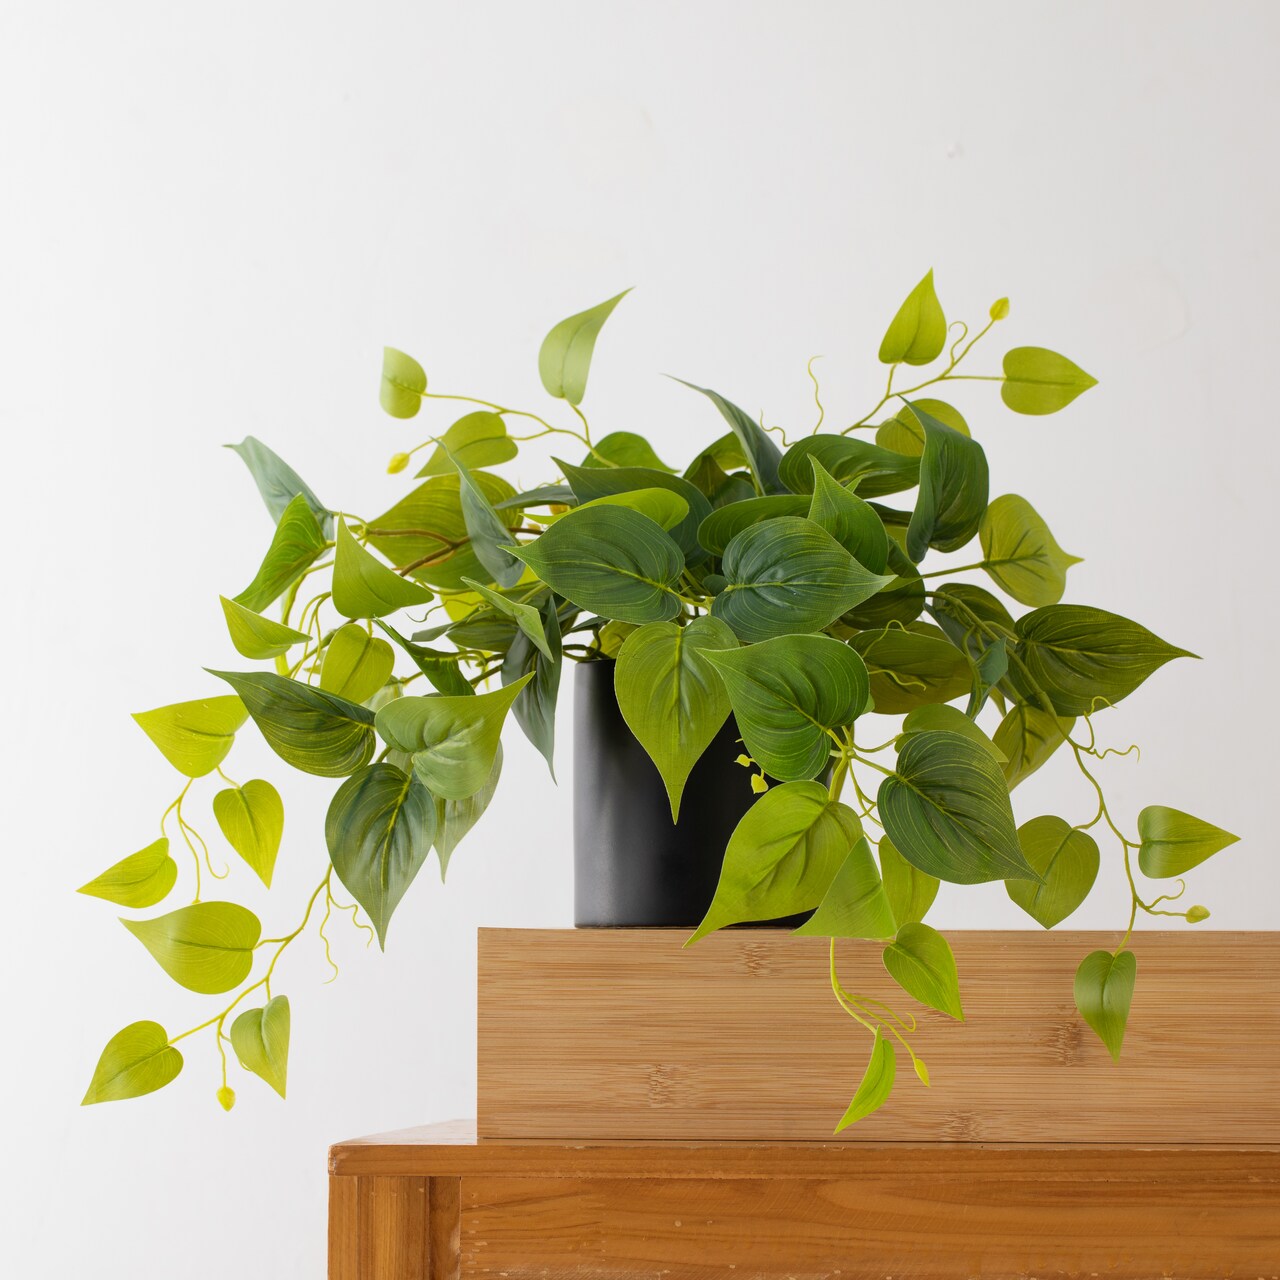 Faux Plants in Black Ceramic Pot, Artificial Plants for Home Decor Indoor,  Ivy Small Fake Plants - Fake Plants Decor, Green Plants Artificial Décor, Artificial  Plant for Indoor and Outdoor